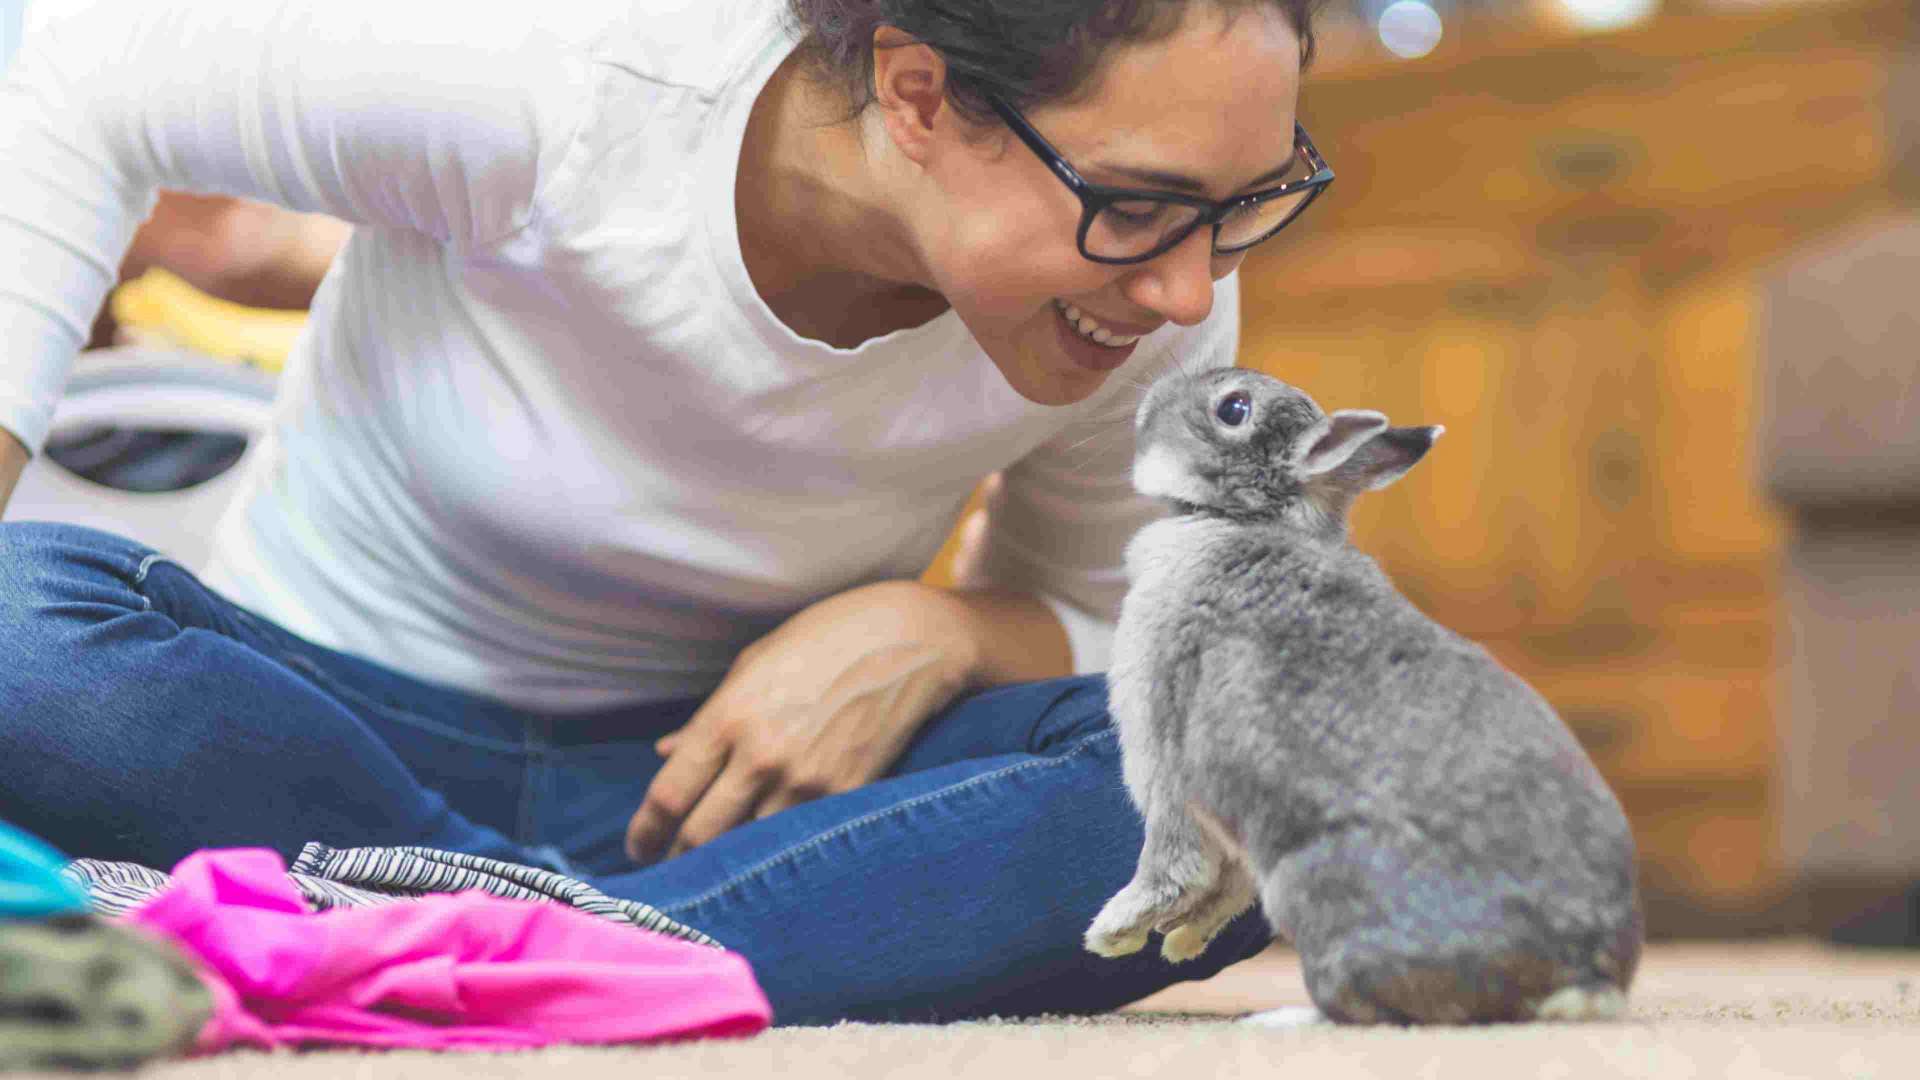 Rabbit playing with owner